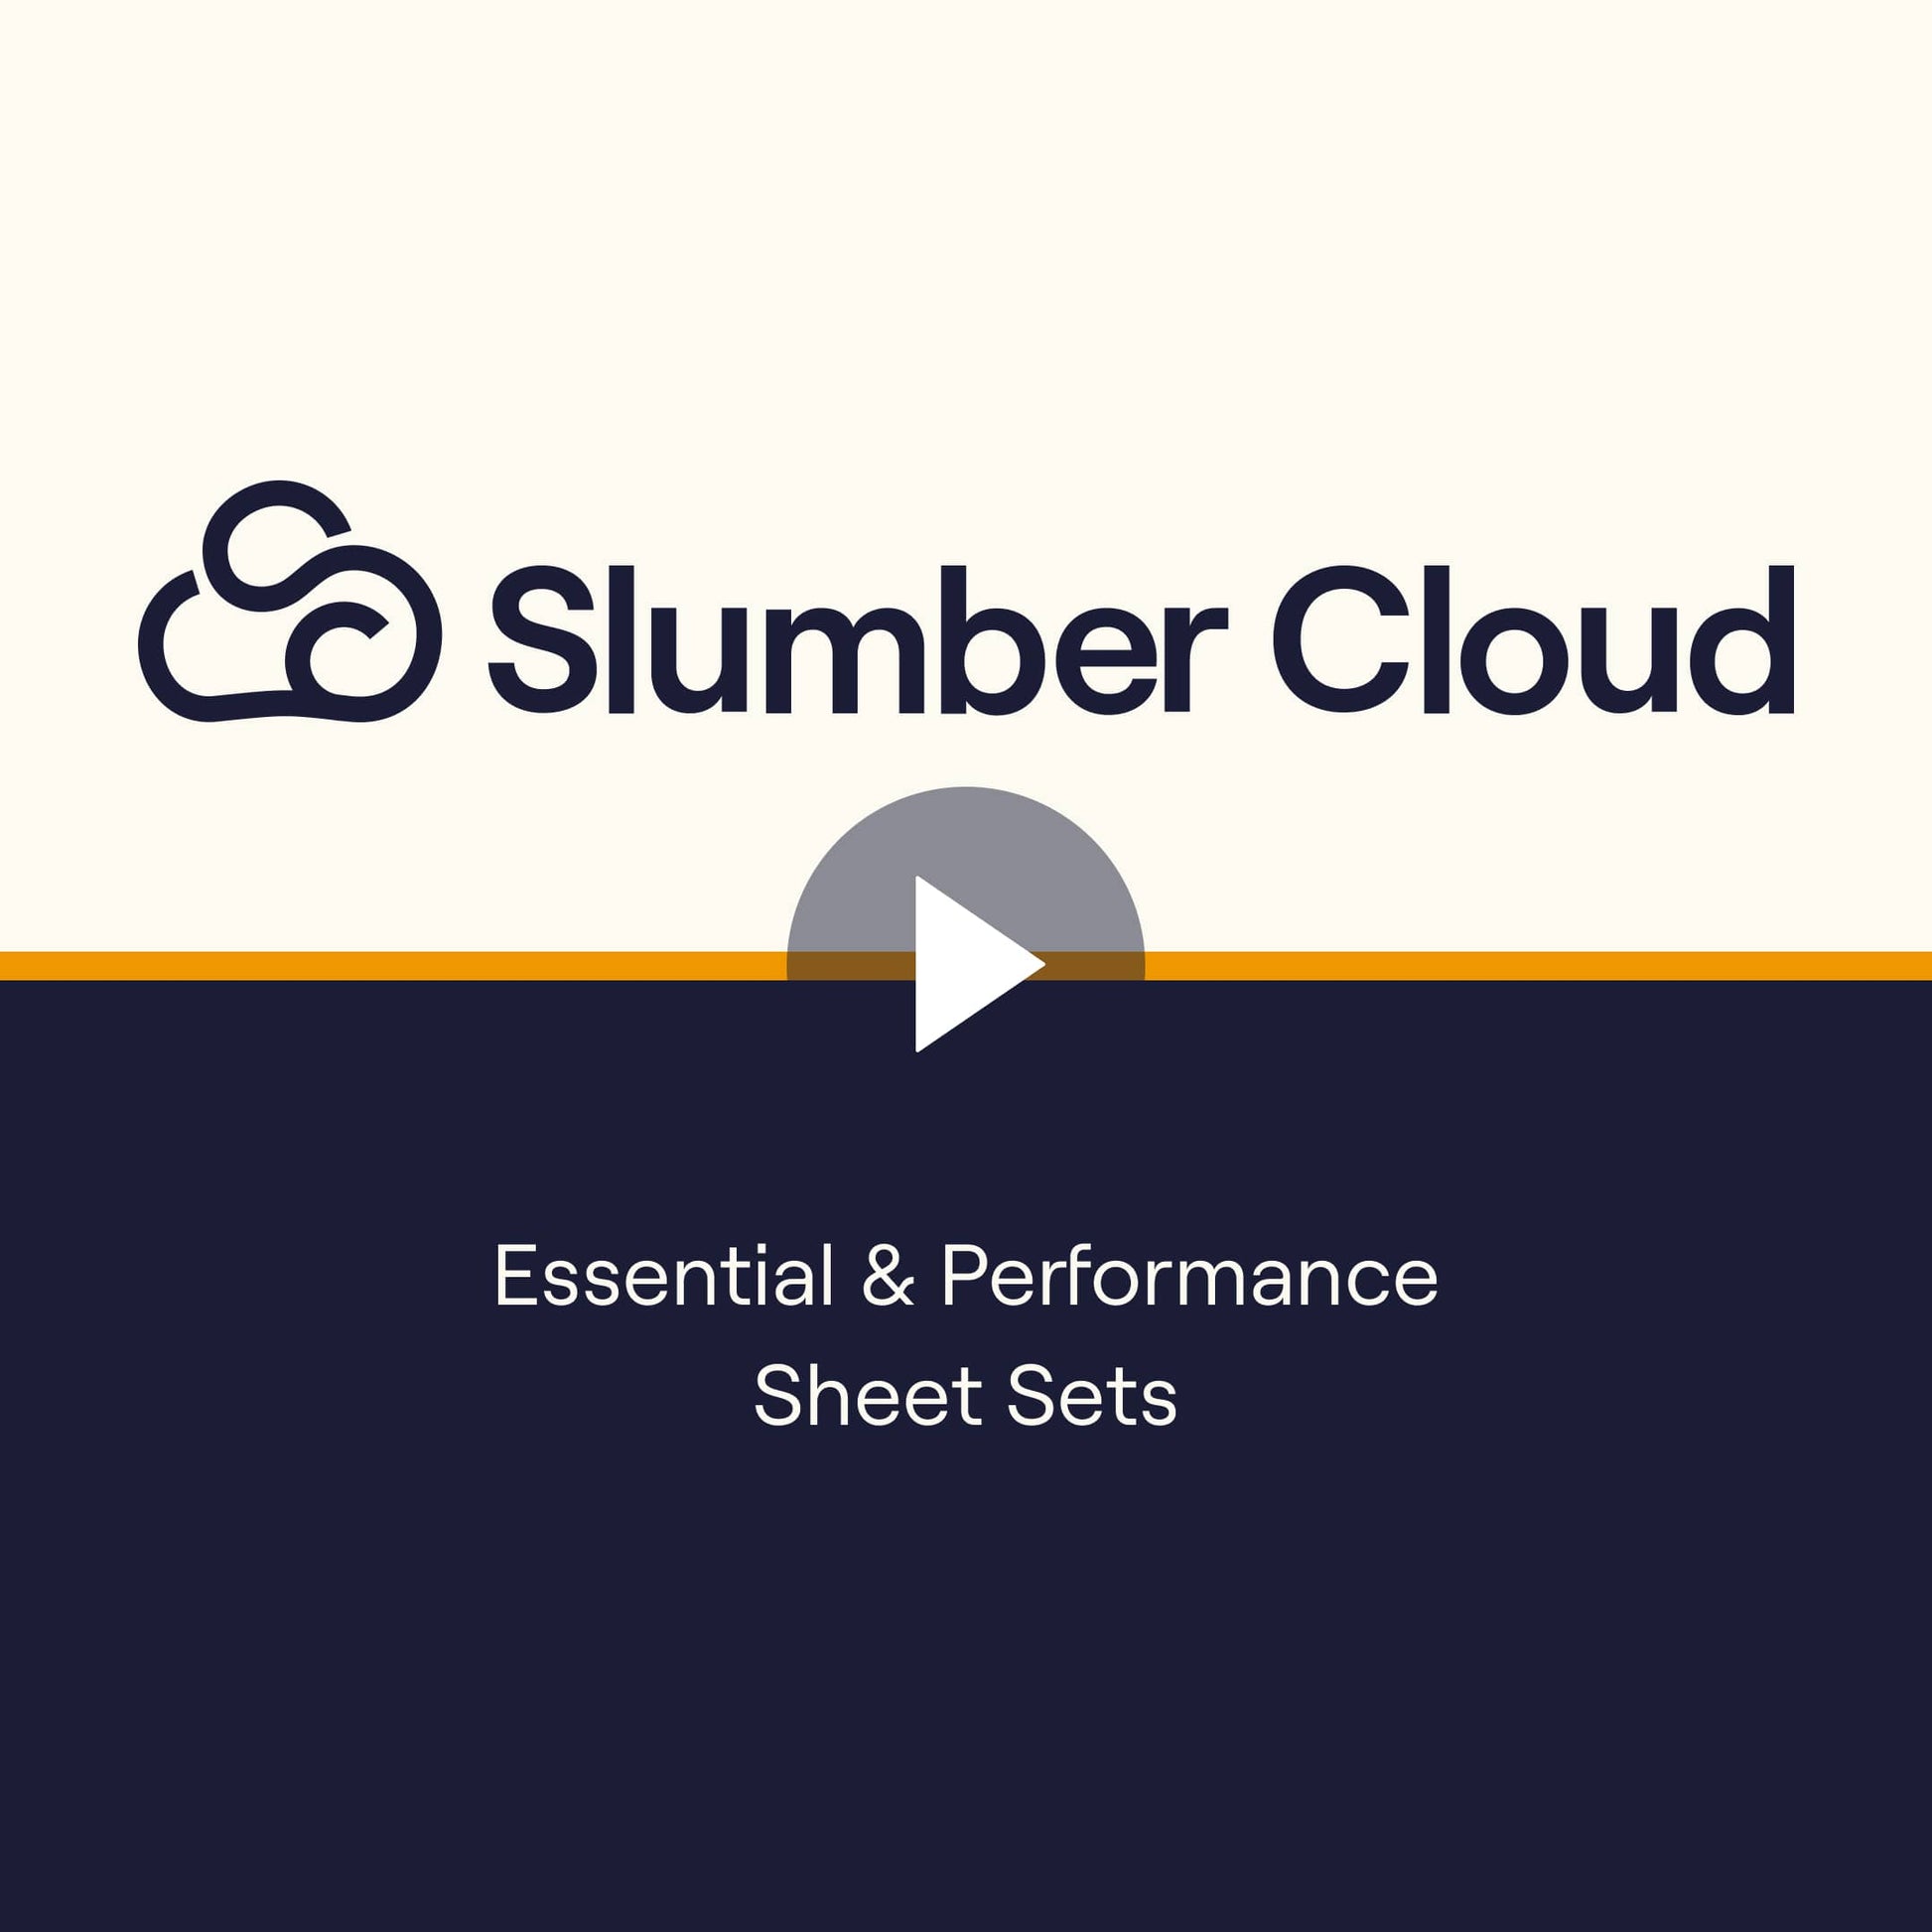 Video outlining Slumber Cloud Essential & Performance Sheets with temperature regulation technology